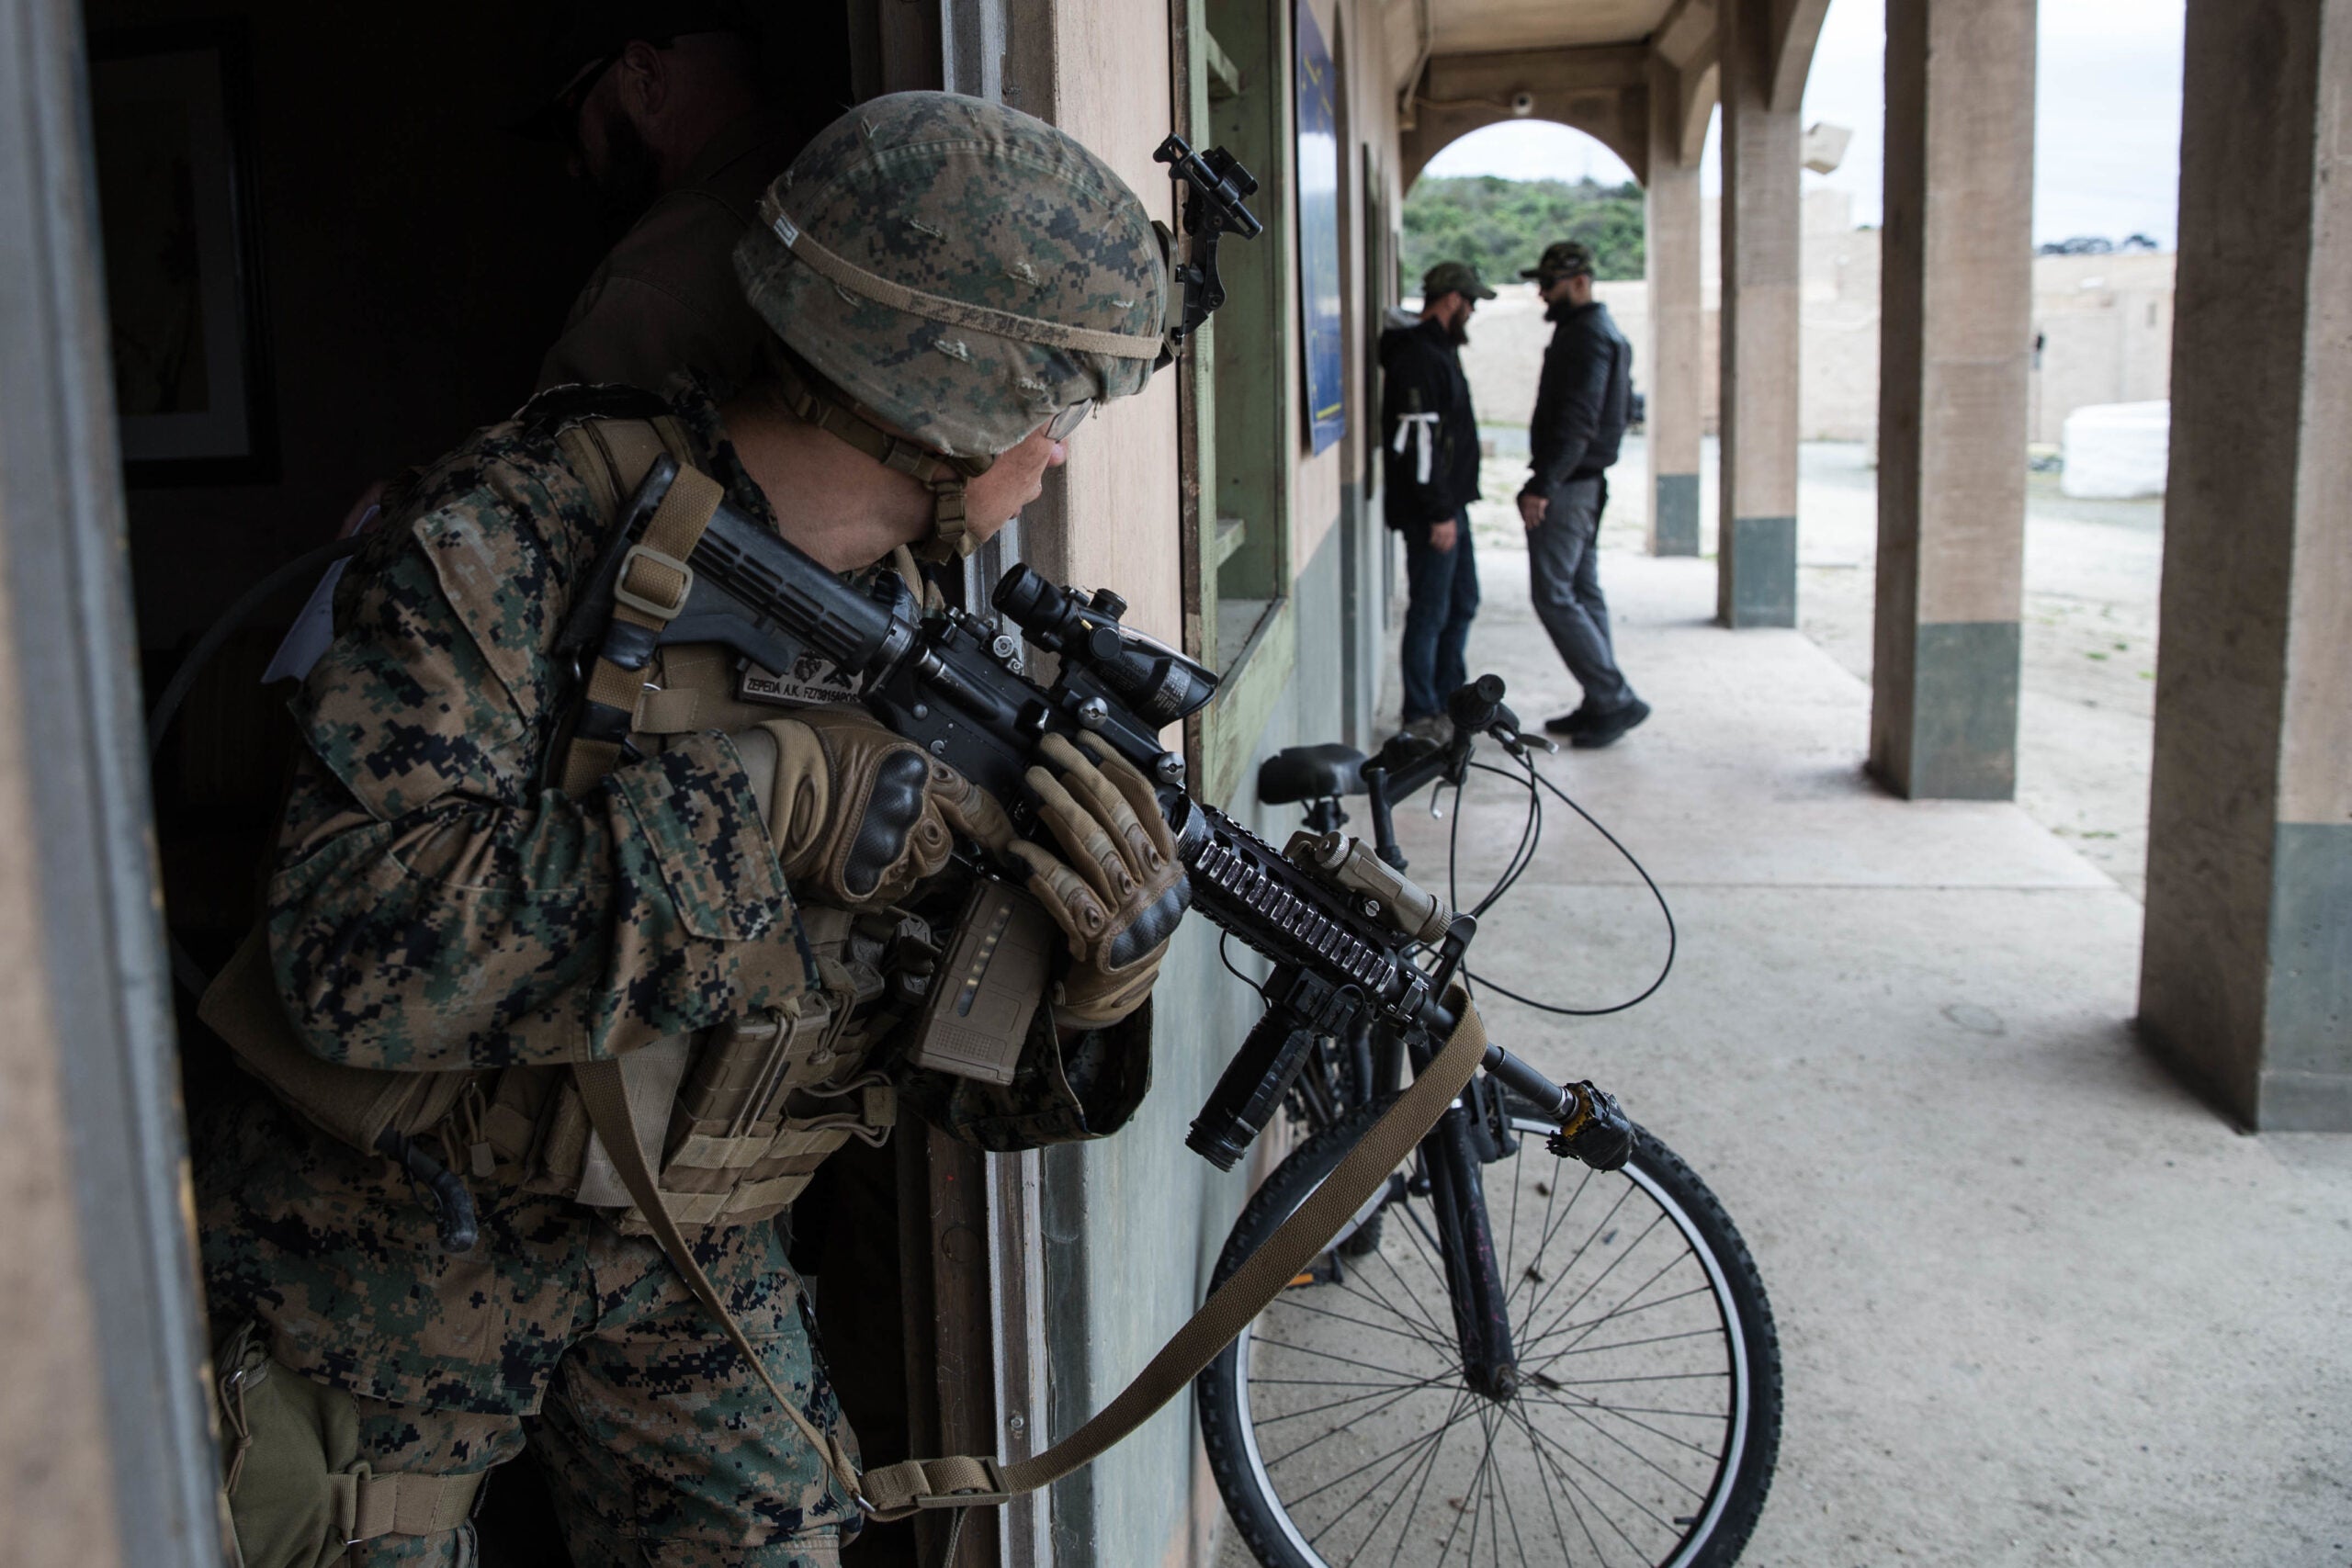 U.S. Marine Corps Lance Cpl. Aidan Zepeda, a rifleman with 2nd Battalion, 4th Marine Regiment, 1st Marine Division, reports simulated enemy threats during the Infantry Integration with Counterintelligence/Human Intelligence Operations (CI-HUMINT) (TACEX 19.2) at Marine Corps Base Camp Pendleton, California, March 21, 2019. TACEX 19.2 is an exercise for infantry and CI/HUMINT to tailor patrols for both units to effectively locate and sustain possible threats in order to properly train participants for combat deployments.